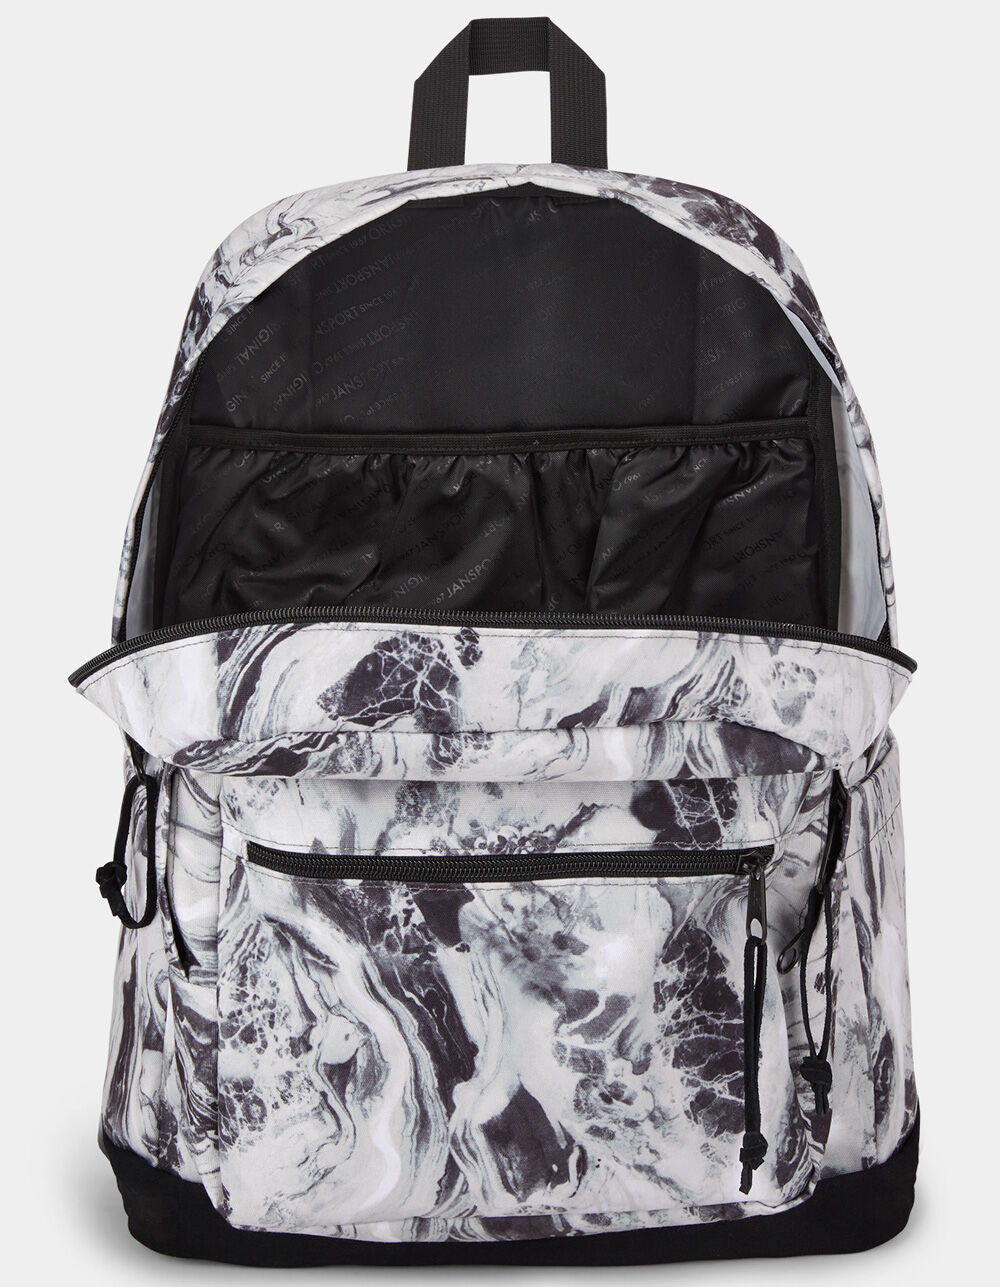 JANSPORT Right Pack Expressions Mined Marble Grey Backpack - MULTI | Tillys